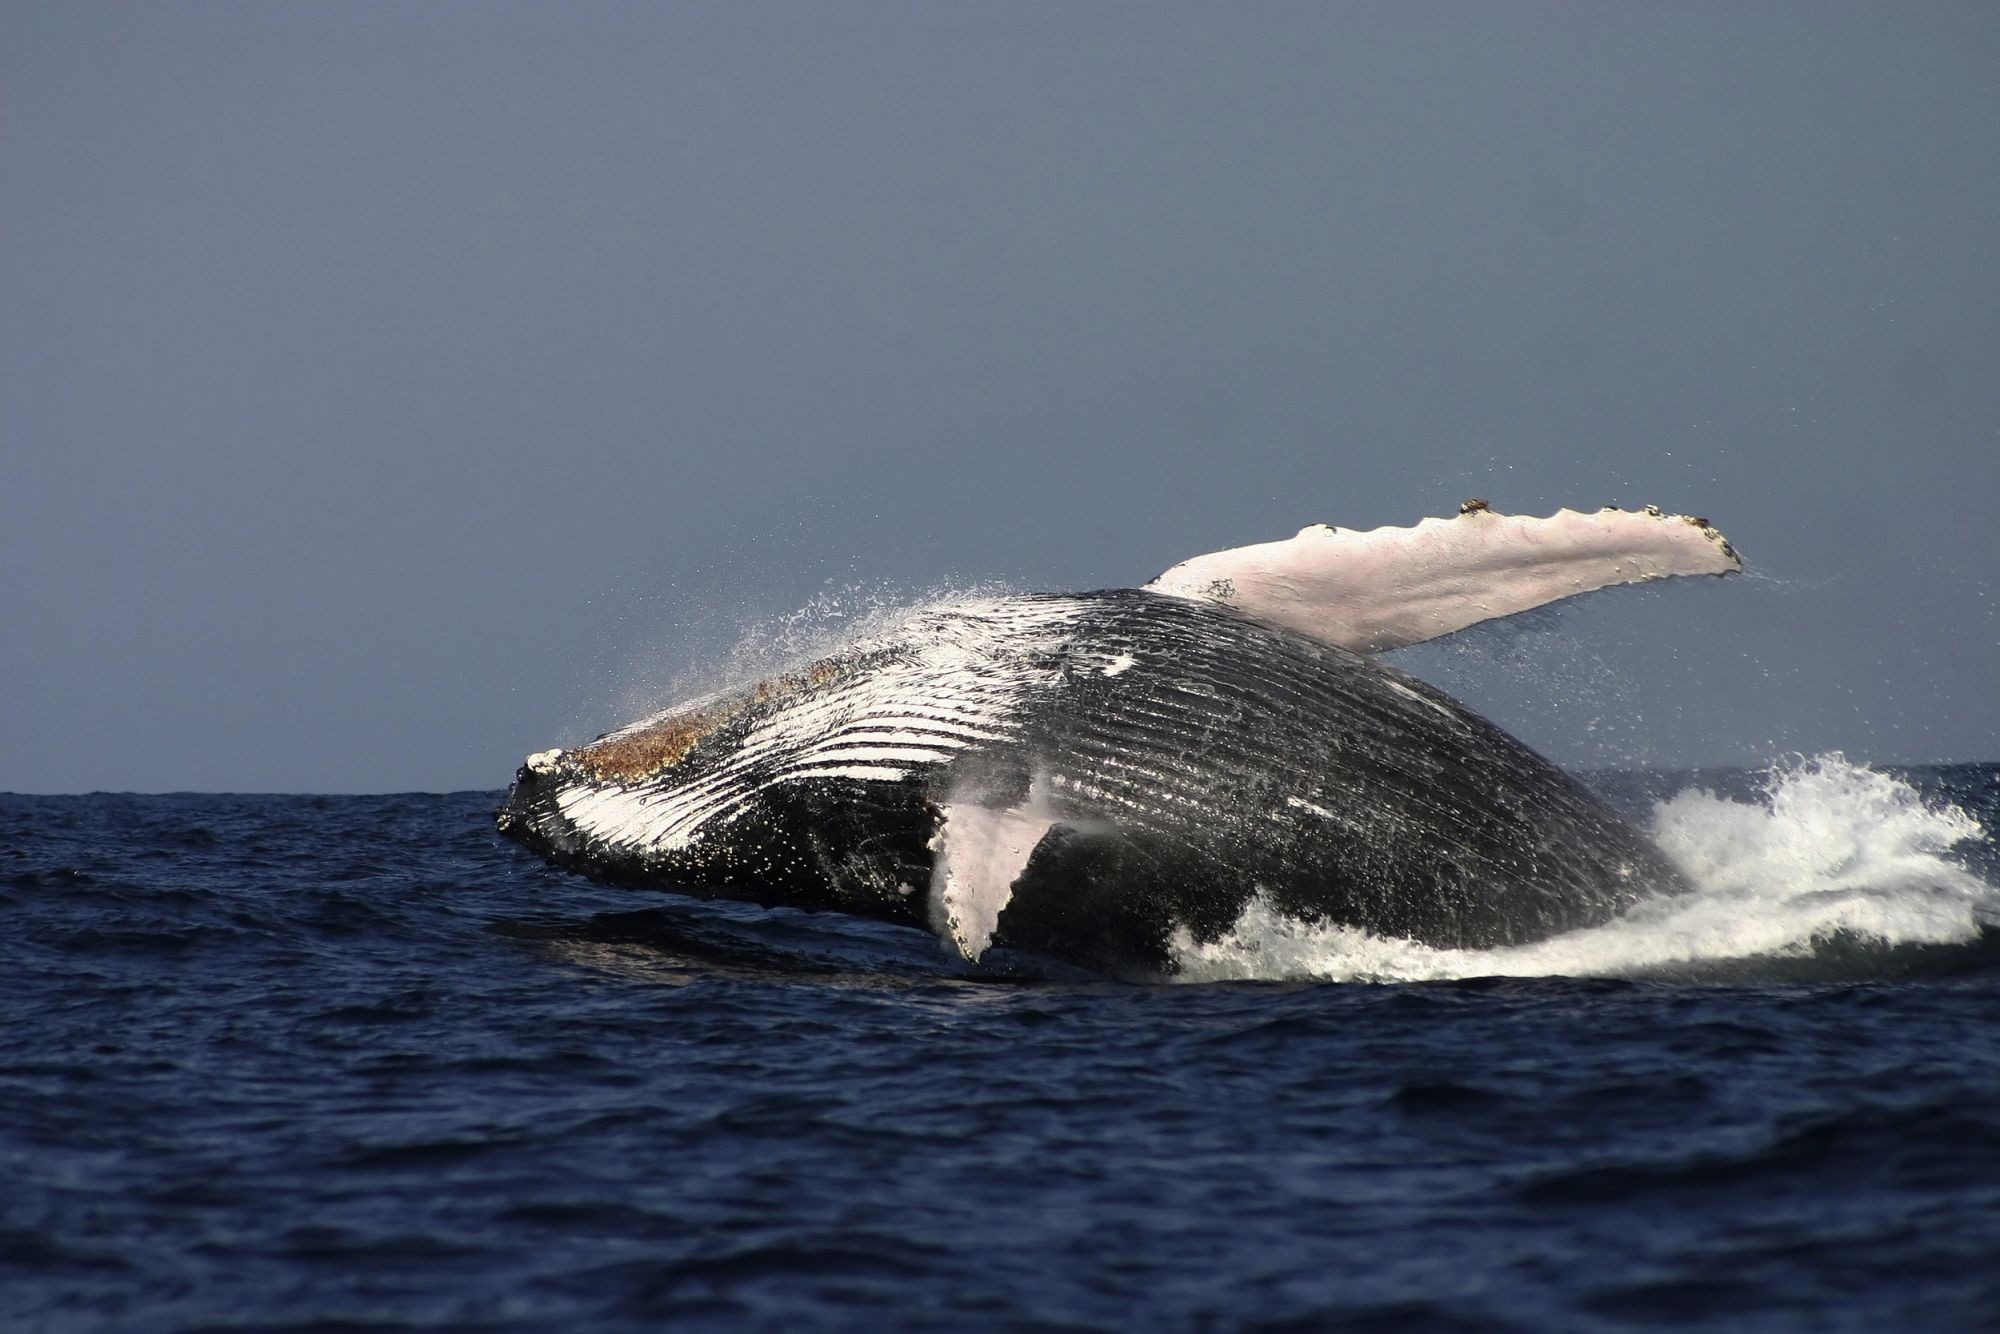 Whale breaching in the Pacific Ocean - World Animal Protection - Sea Change